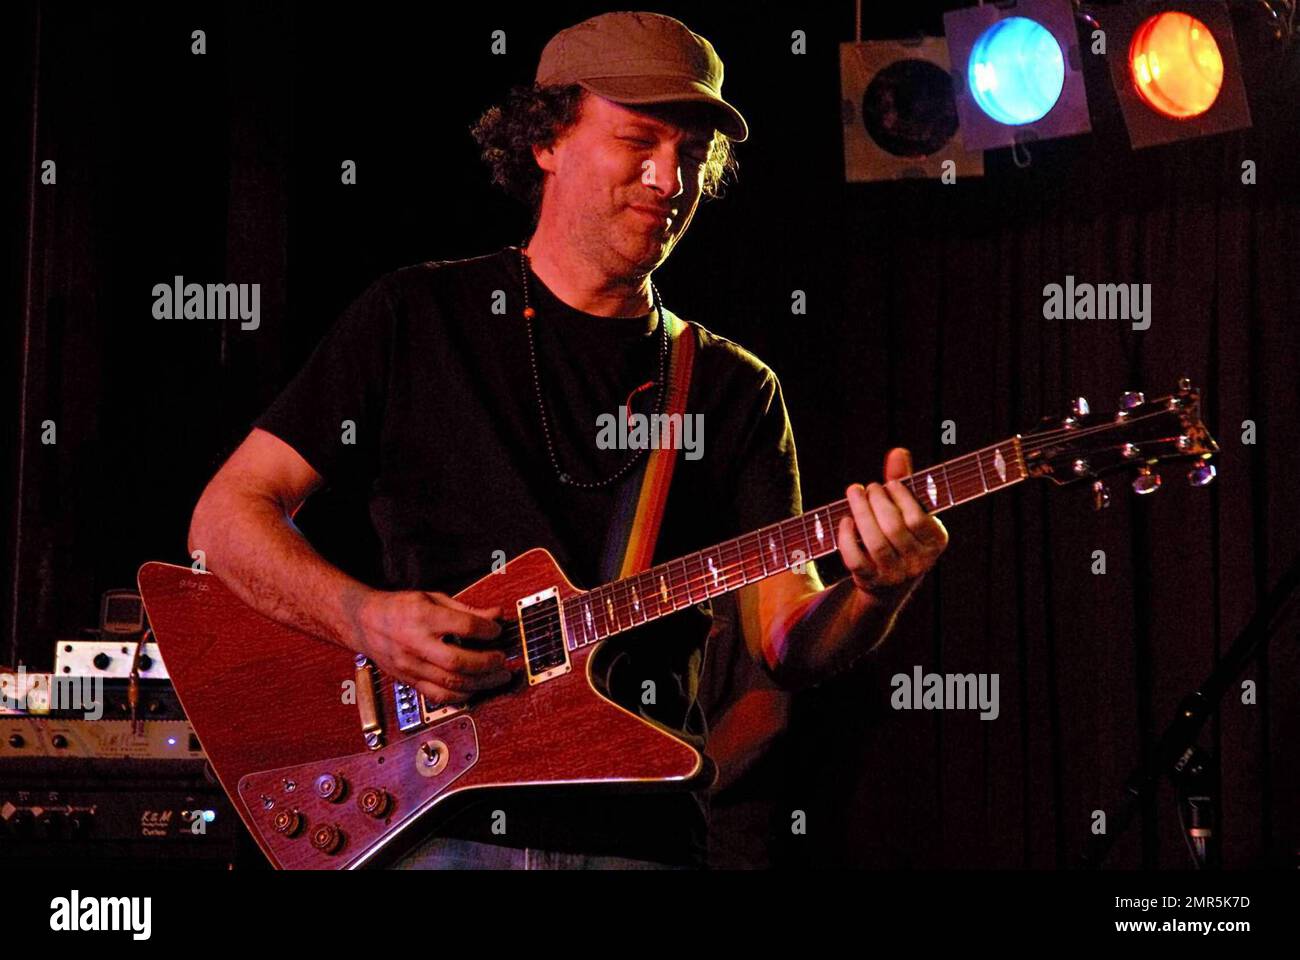 Steve Kimock, also known as the "Guitar Monk" for his relentless pursuit of  the art of guitar, performs live with his band Crazy Engine at B.B. King's  Blues Club in New York,